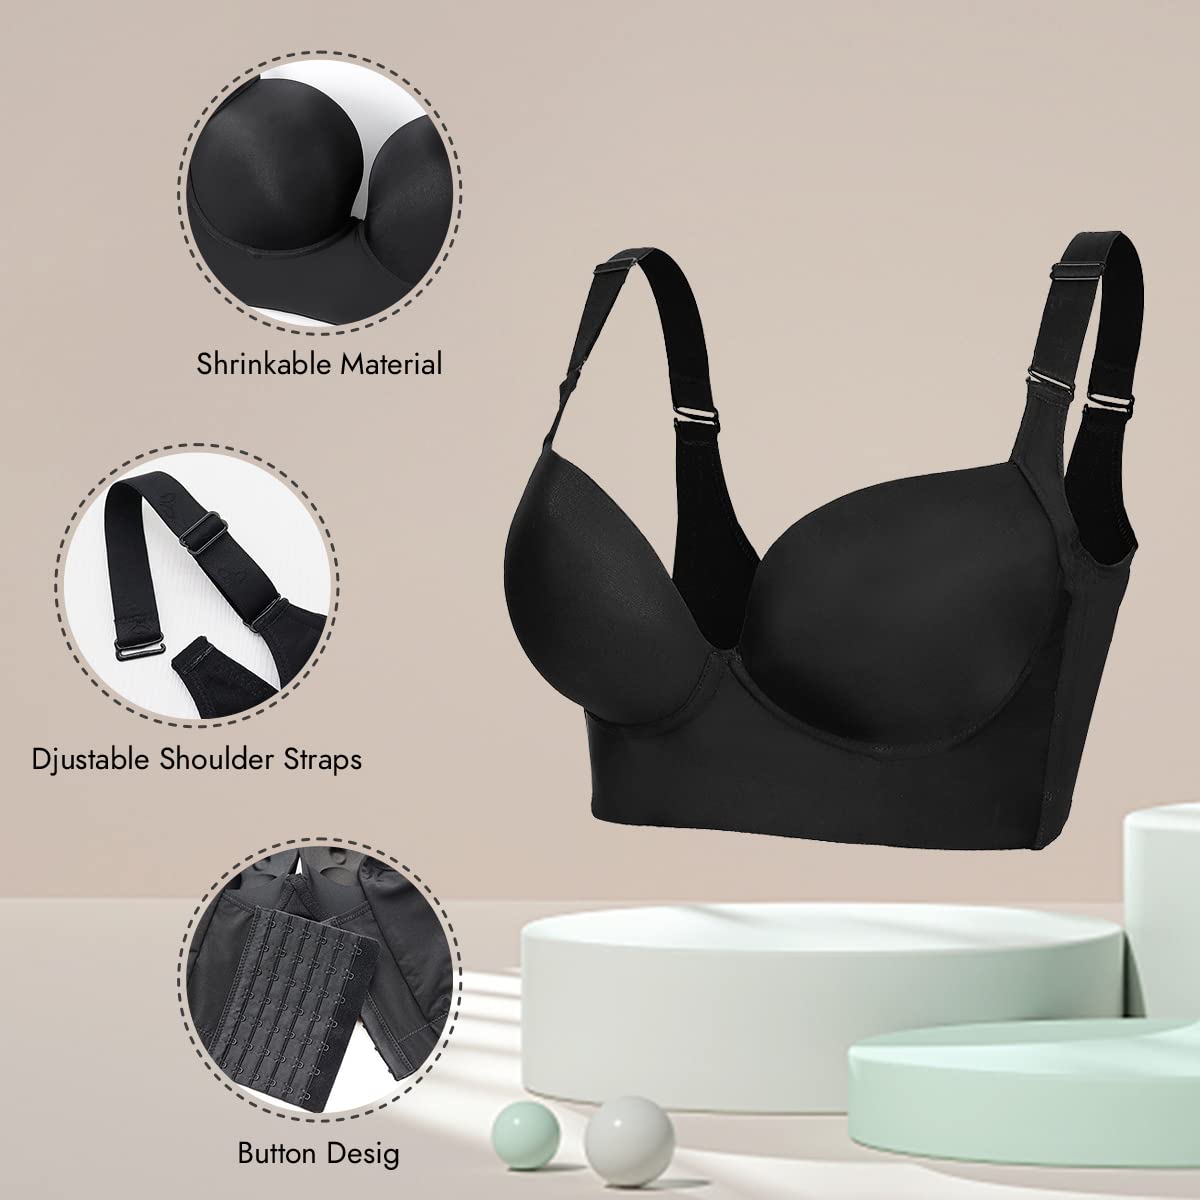 Woobilly®Push-Up Back Smoothing Bra（Buy 1 Get 1 Free）(2 PACK)